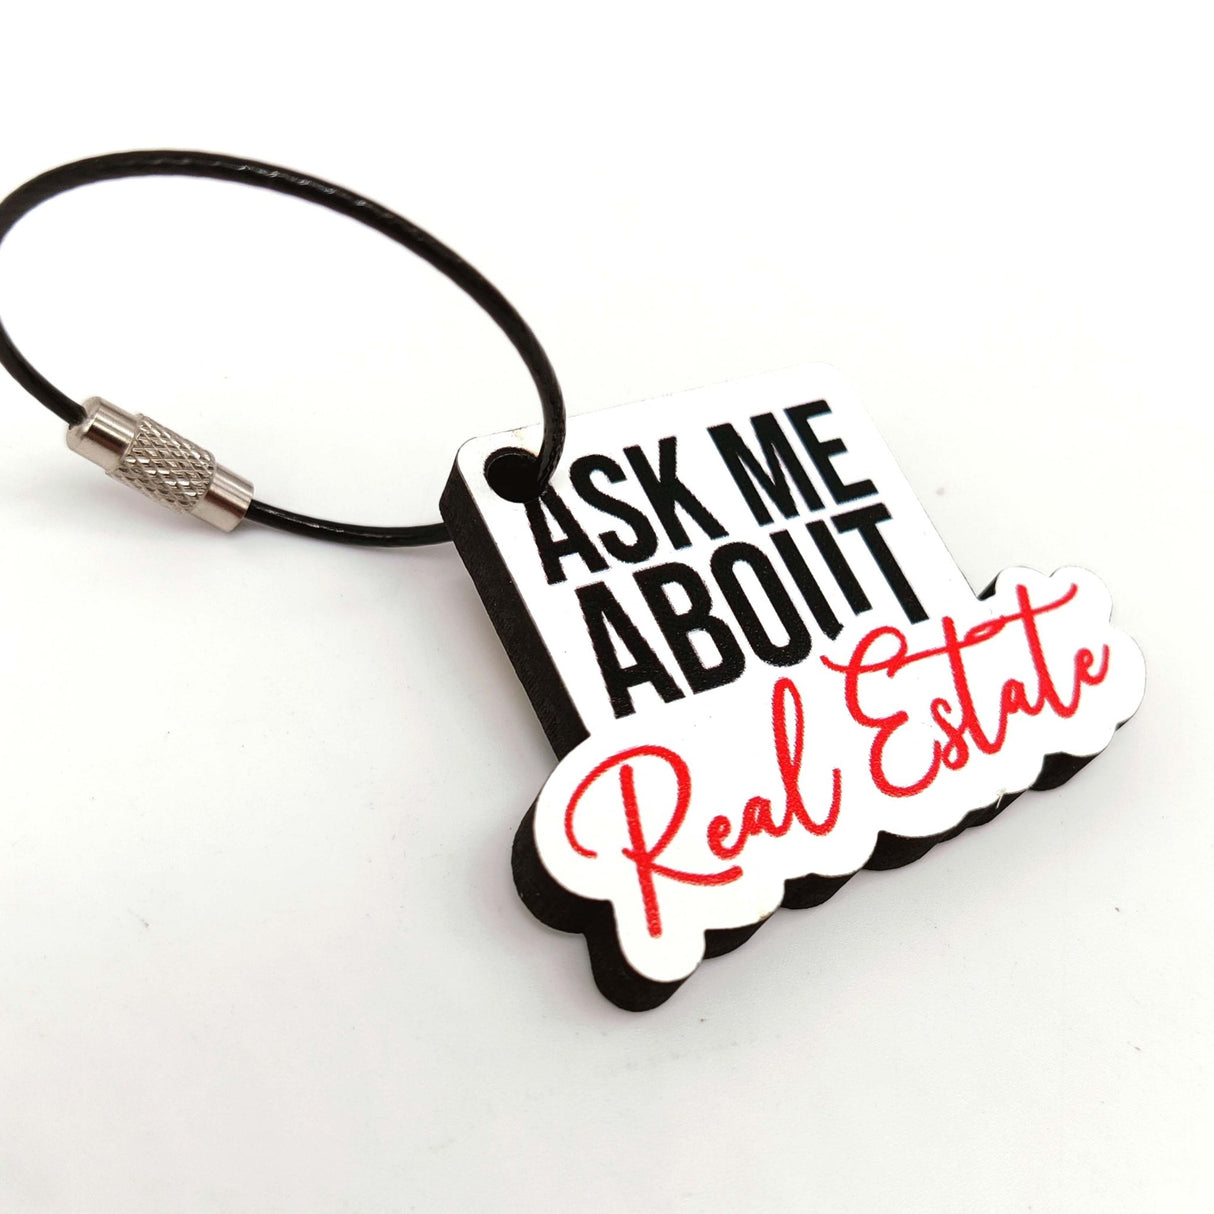 KeyChain for Realtor "Ask me about Real Estate" - Real Estate Store